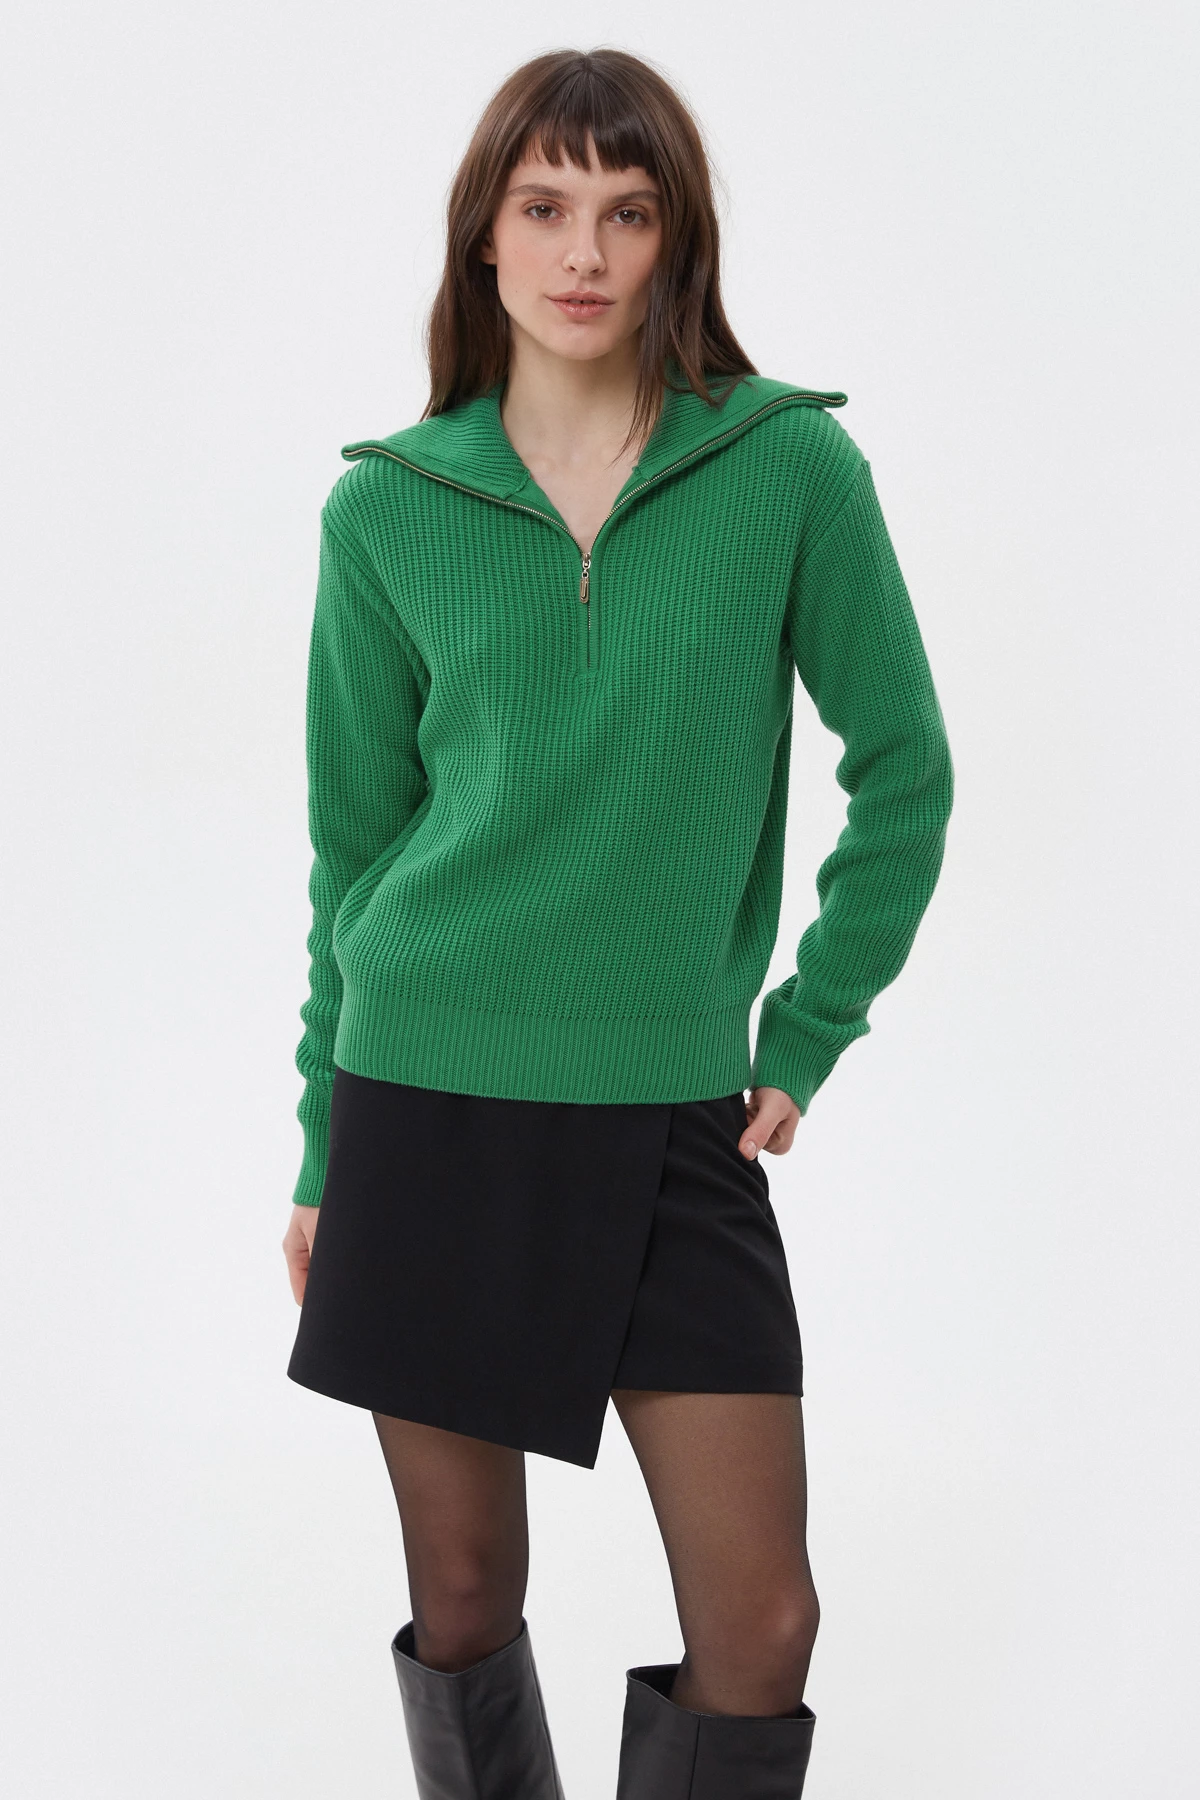 Green cotton zip-up knit sweater, photo 1